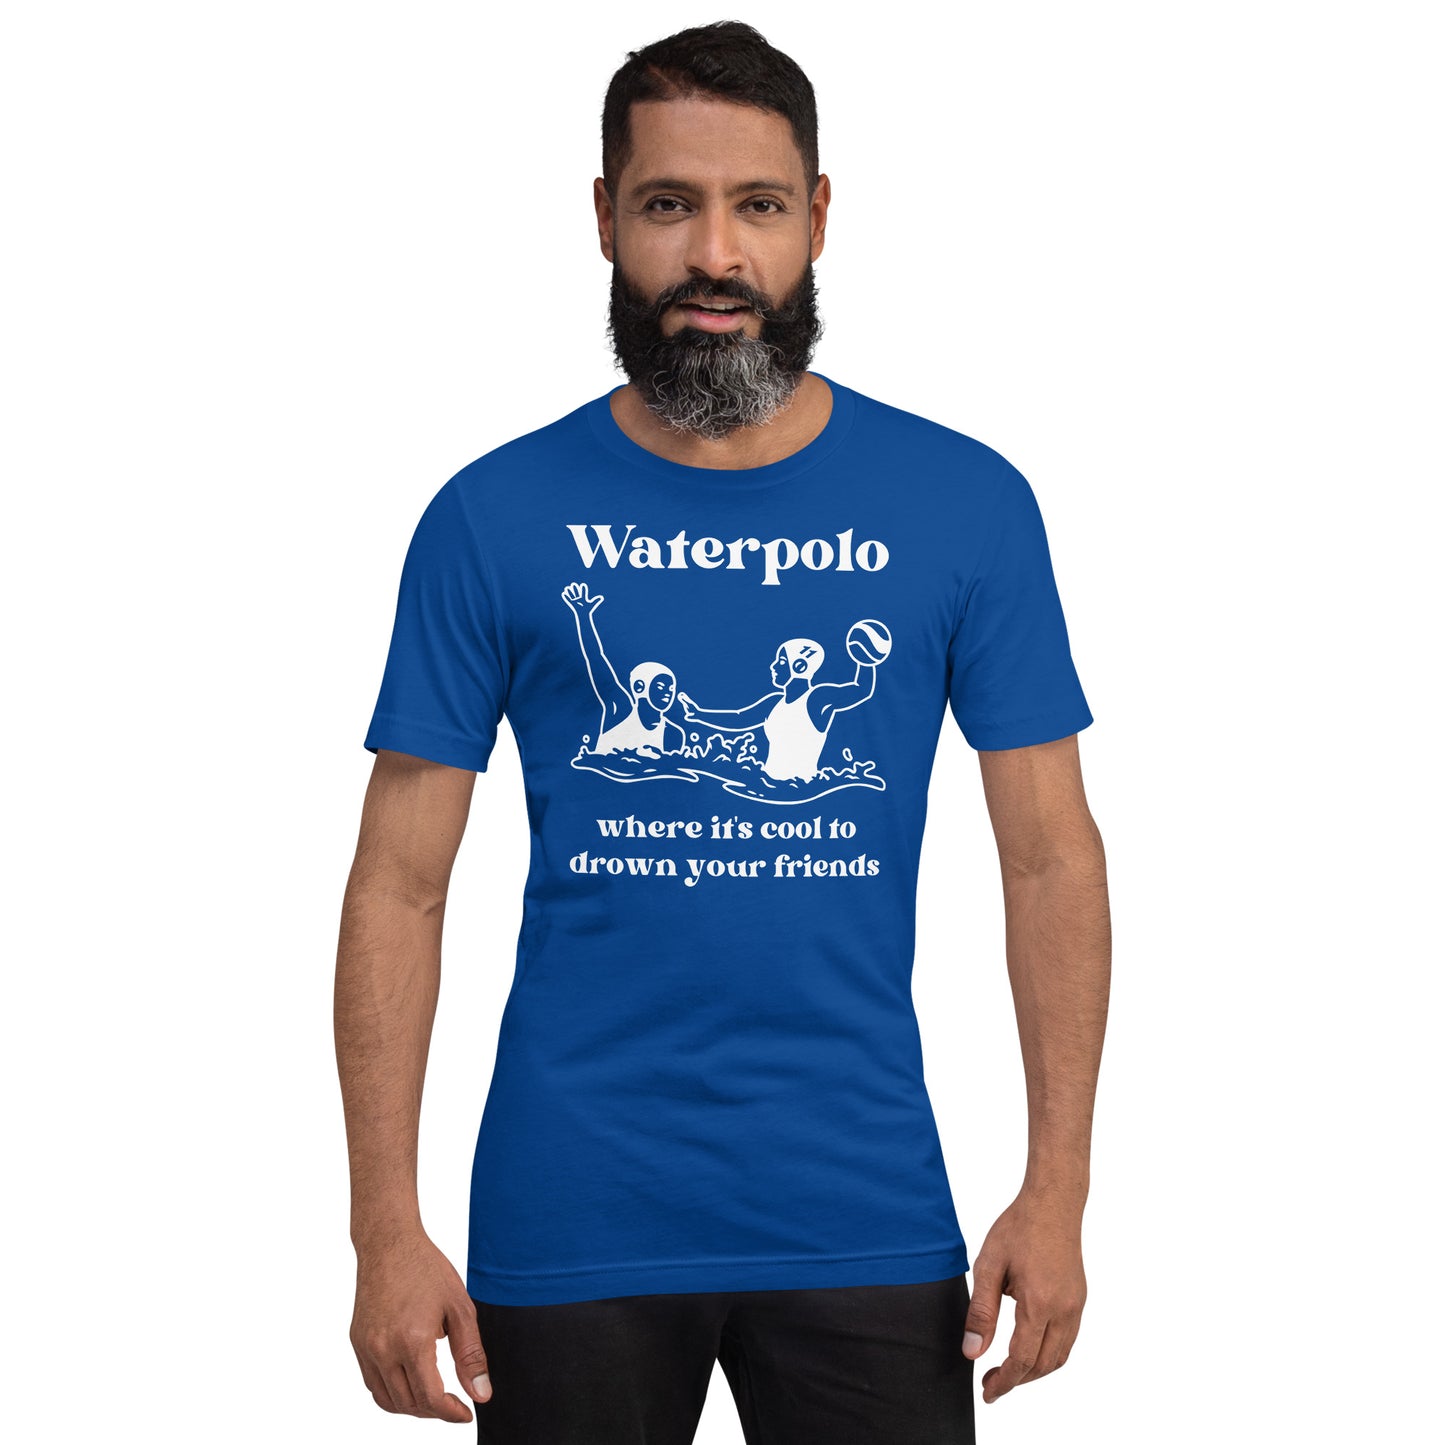 Waterpolo, where it's cool to drown your friends - Unisex Soft T-shirt - Bella Canvas 3001